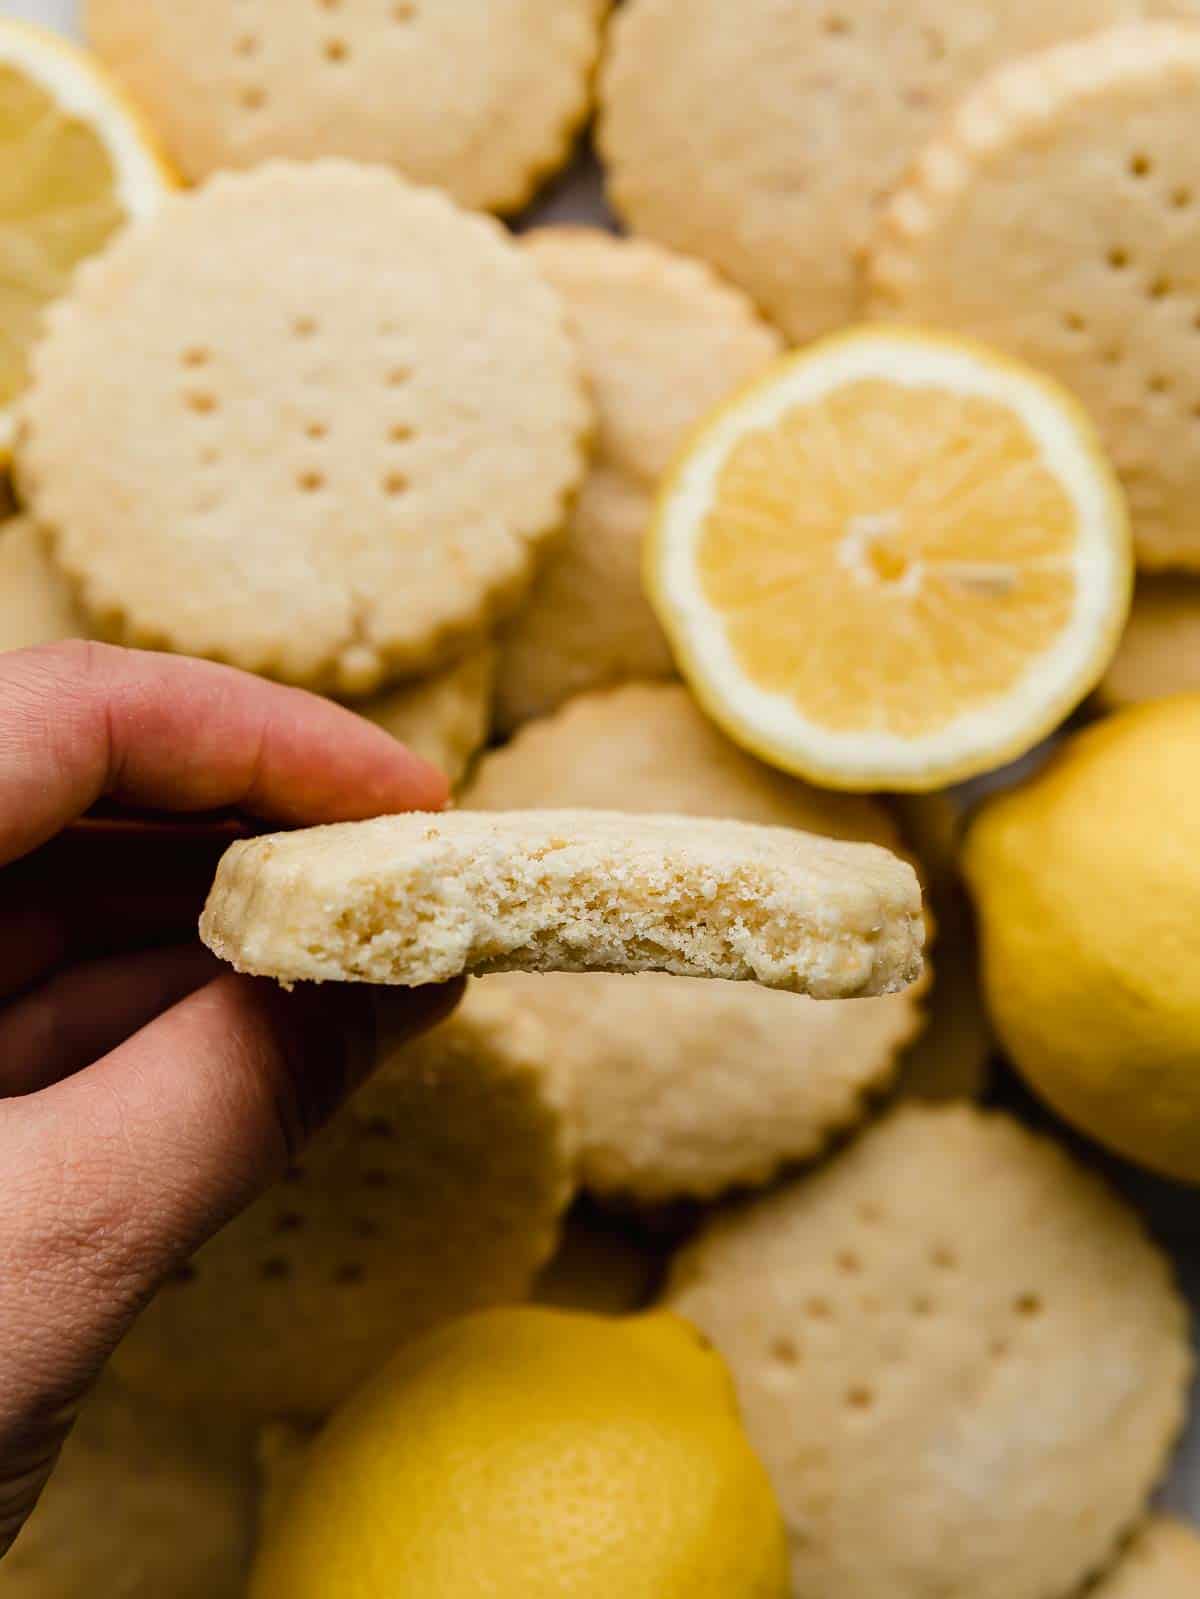 A hand holding a lemon biscuit cookie with sliced lemons and other Lemon Shortbread Cookies in the background.